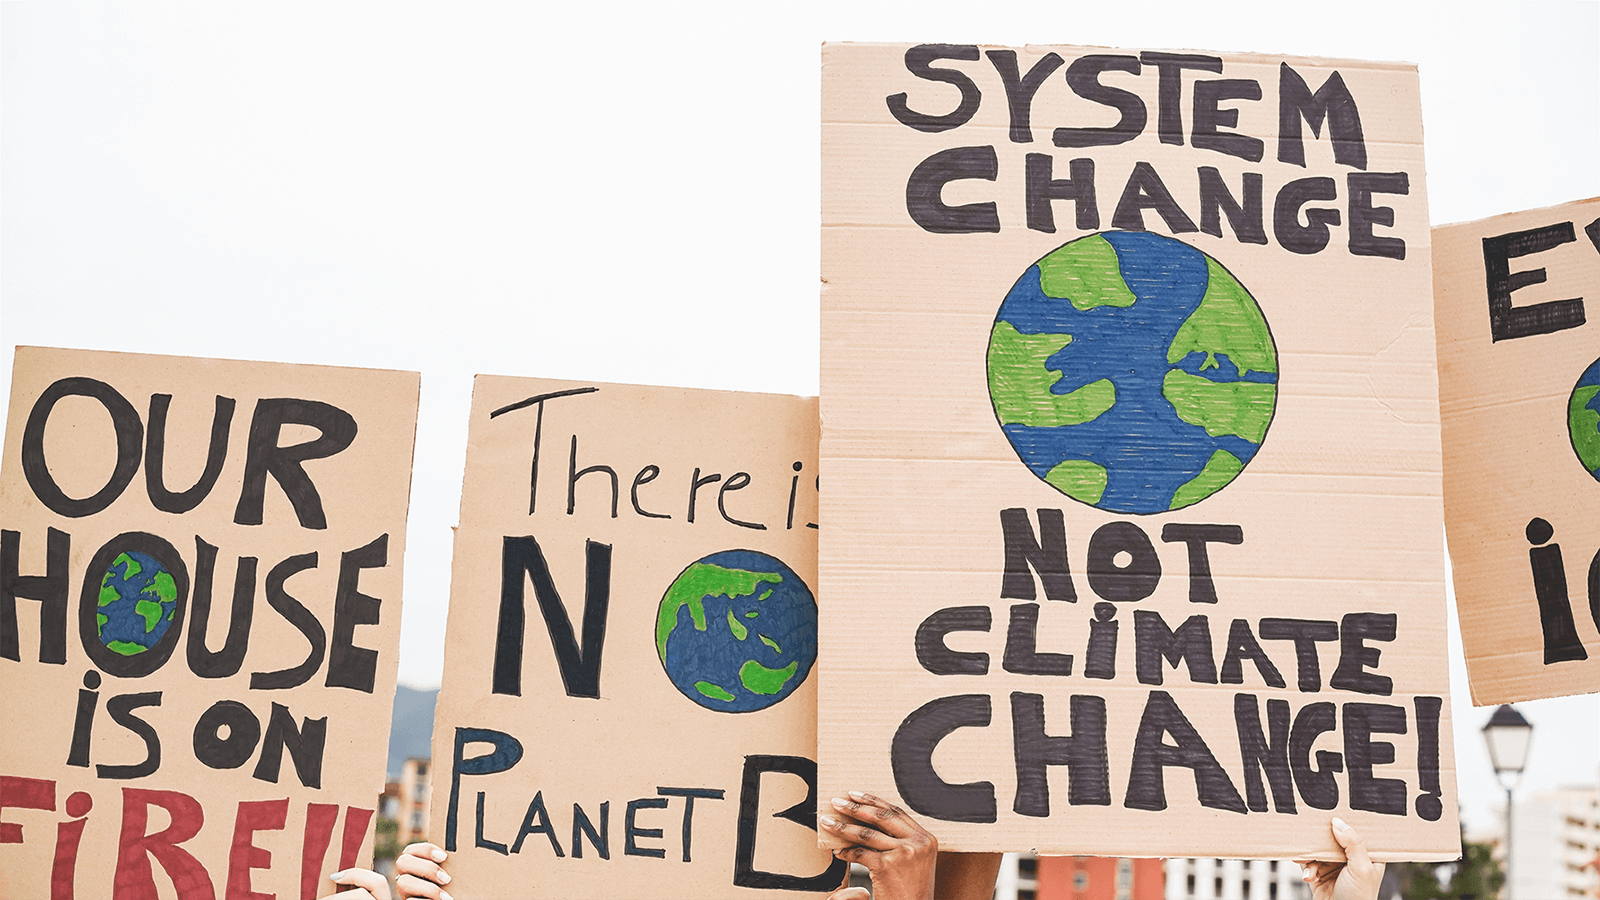 A photo of protest signs urging action to combat climate change